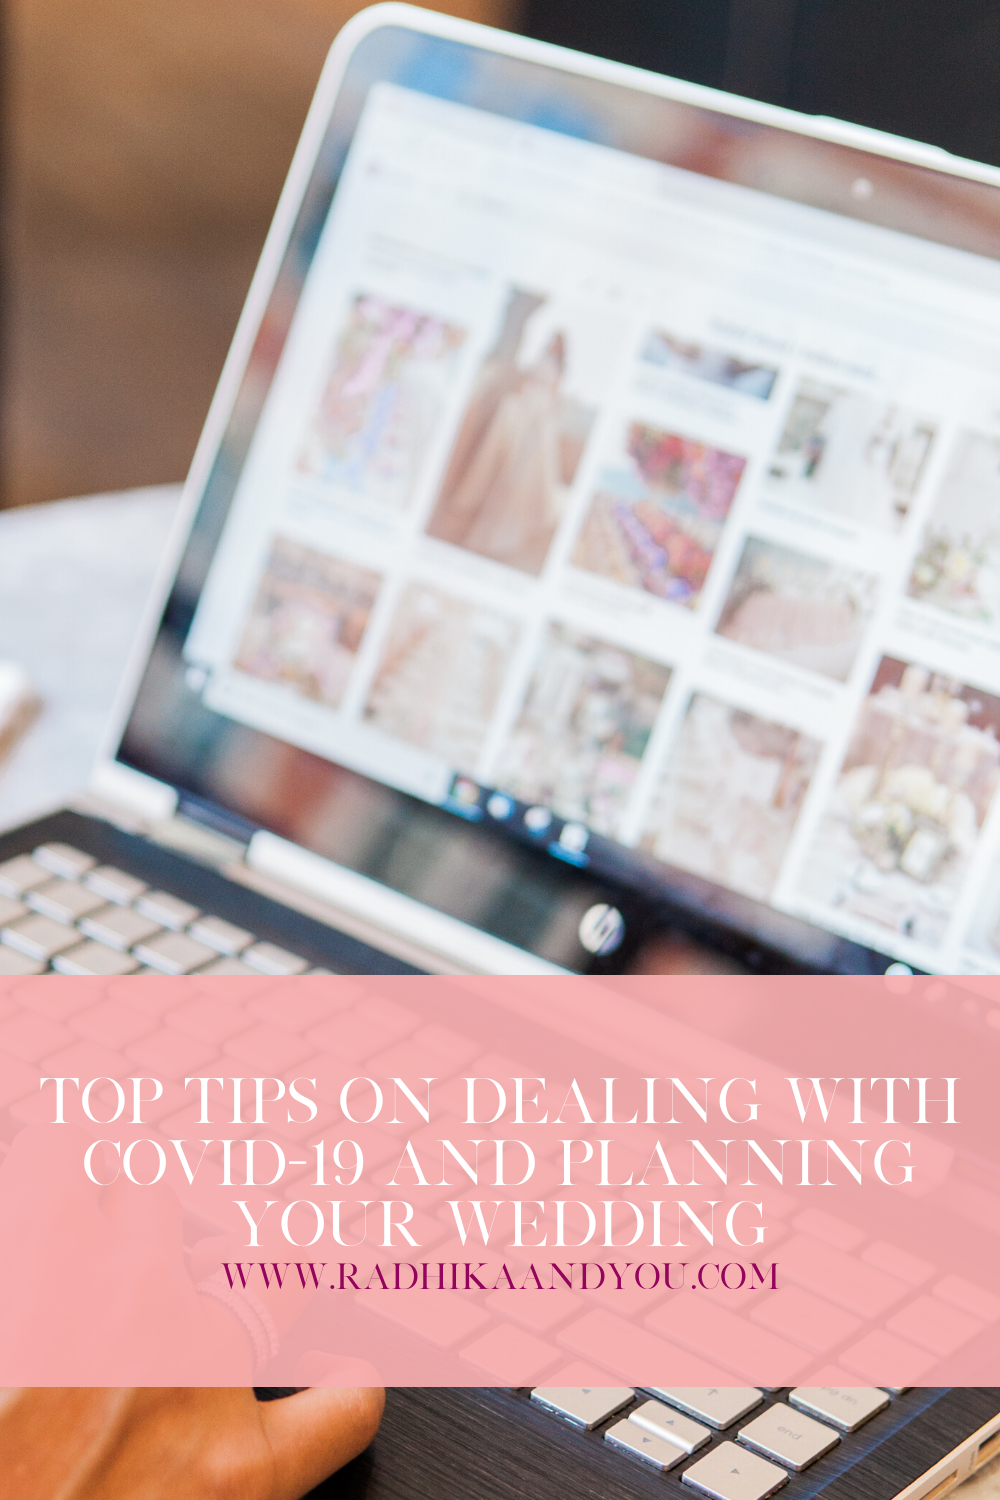 radhikaandyou-tips-on-dealing-with-covid-19-and-planning-your-wedding